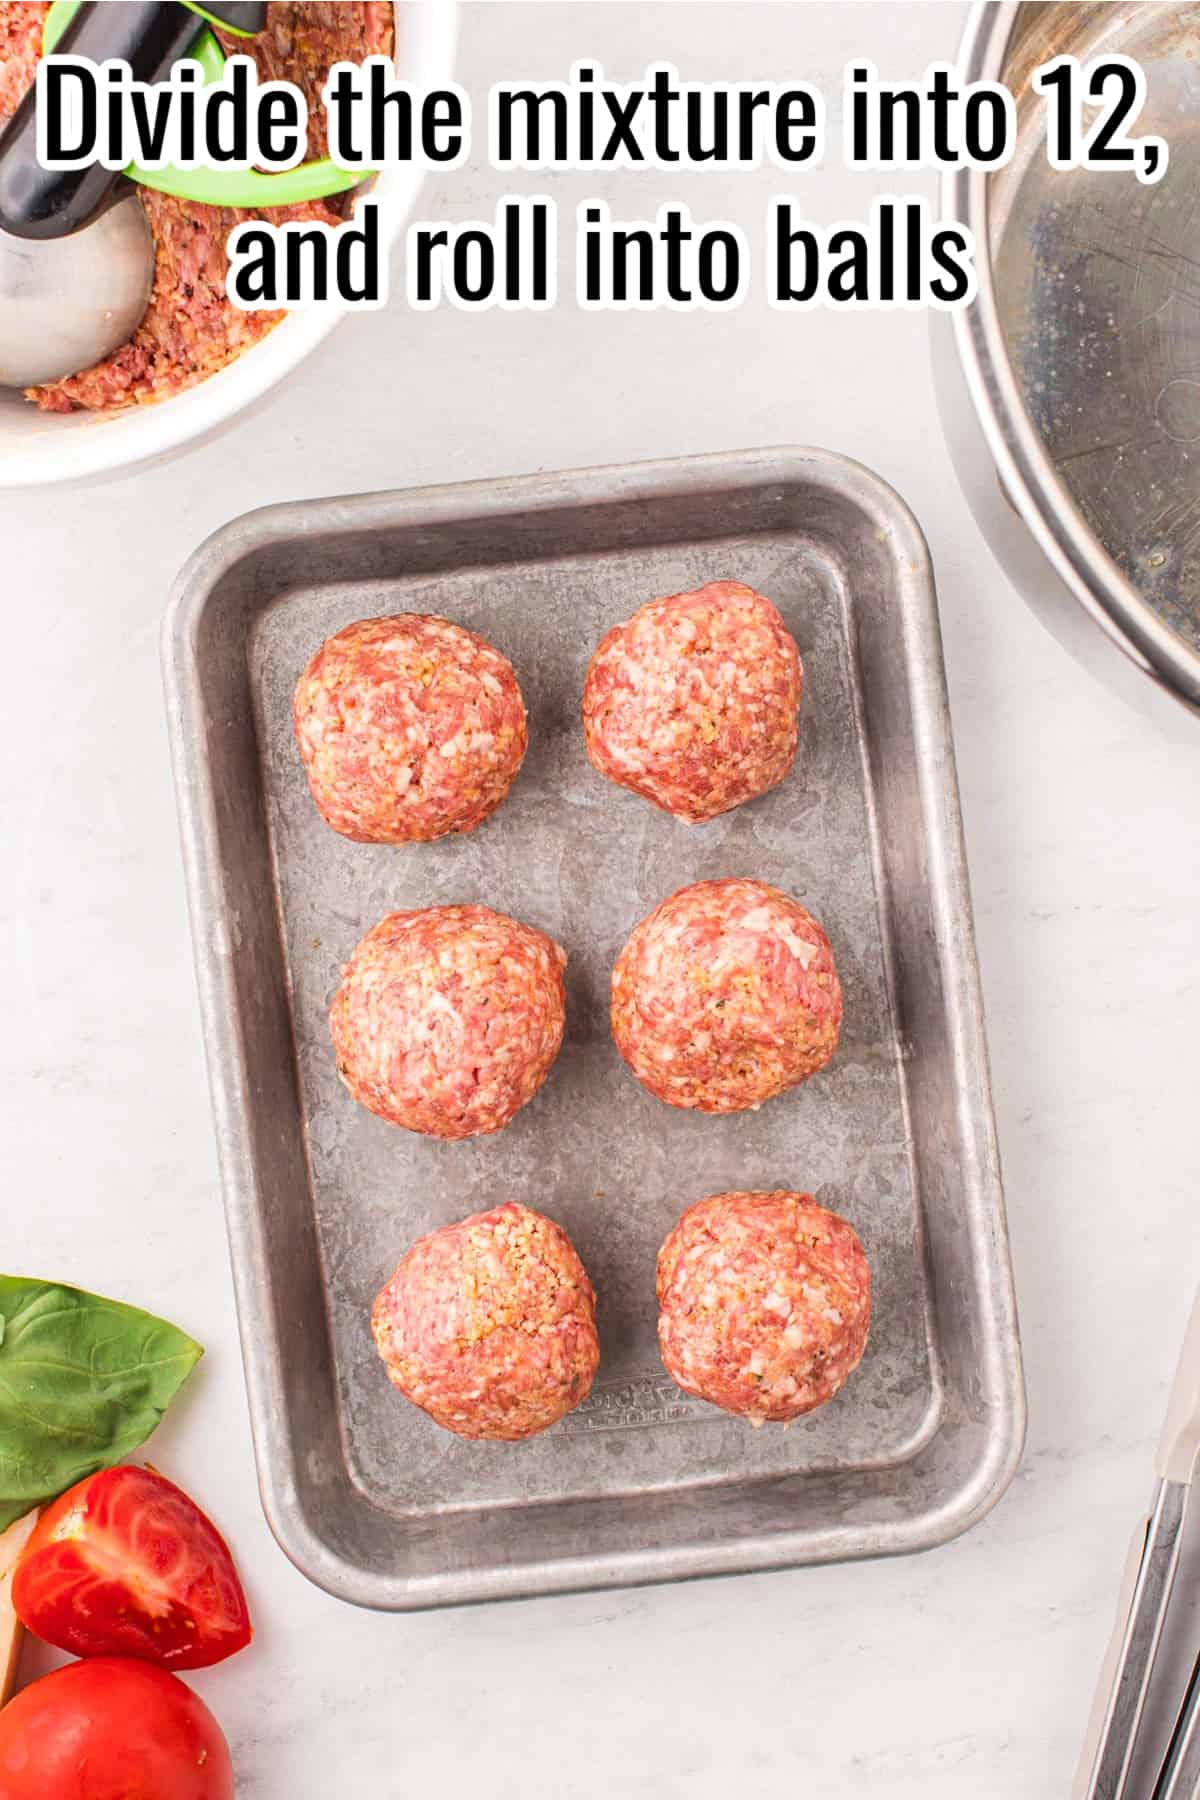 6 meatballs on a tray.